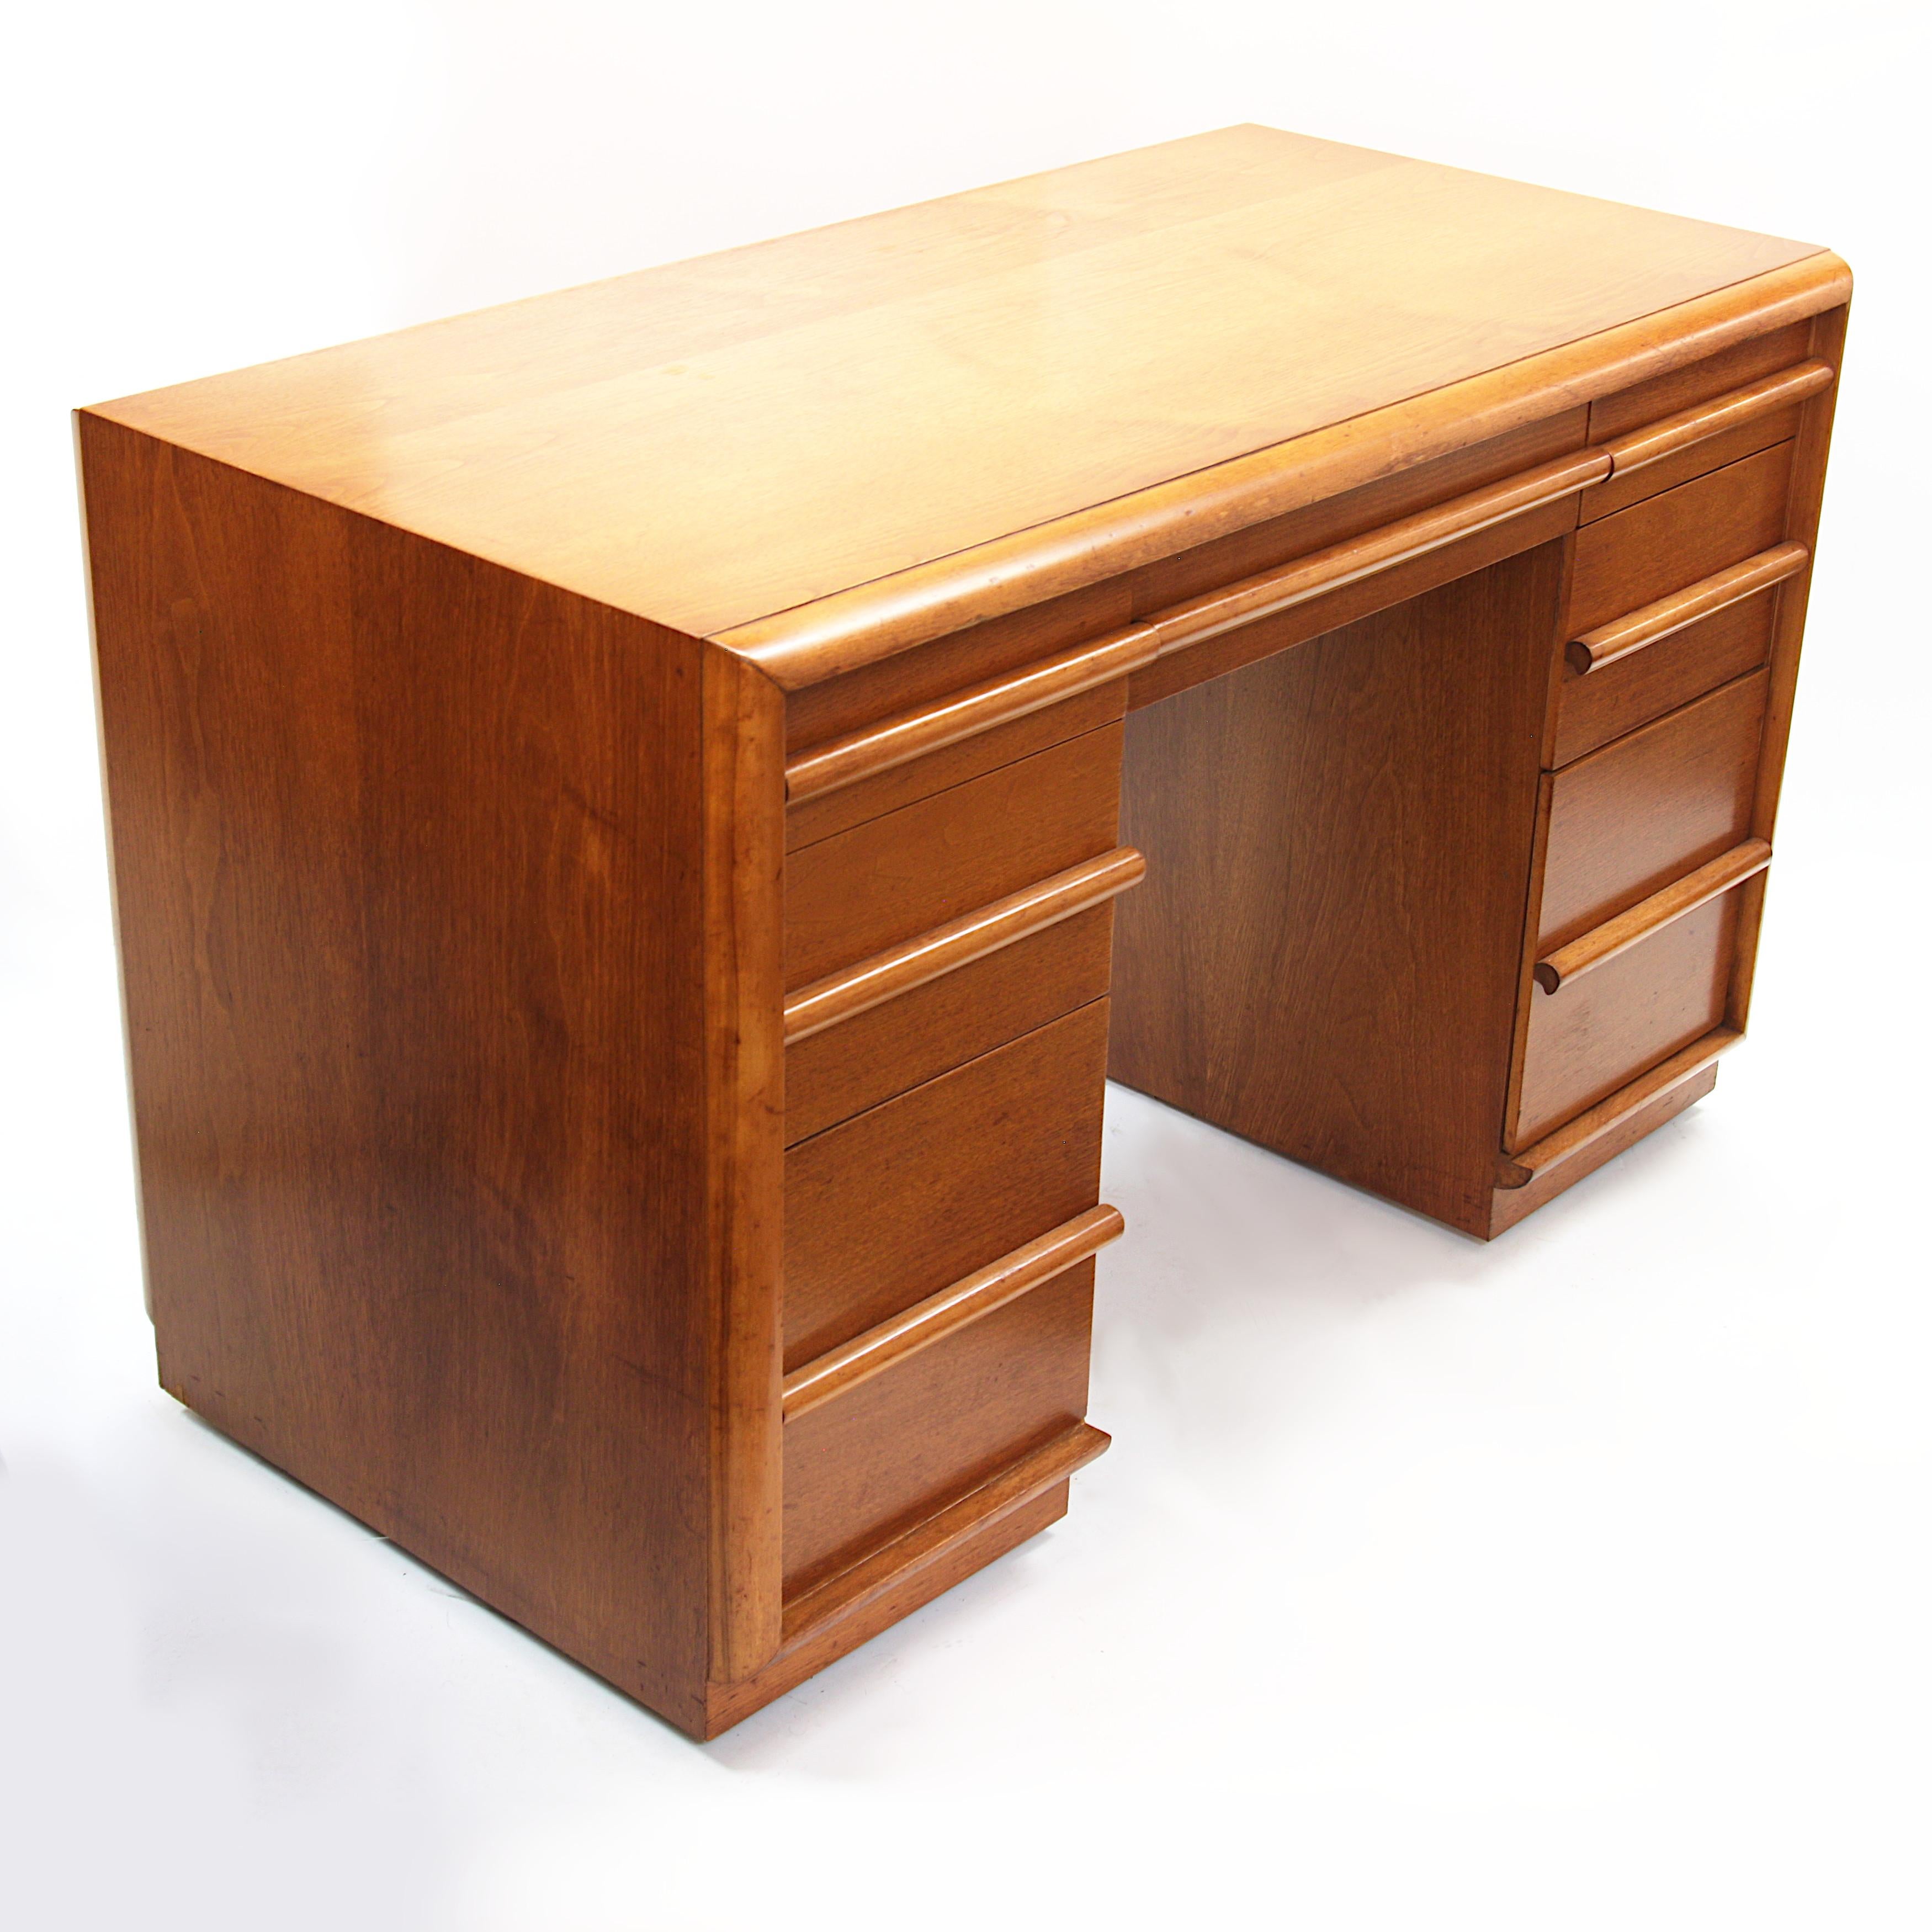 Wonderful little writing desk by the acclaimed T.H. Robsjohn-Gibbing for the Widdicomb Furniiture Co. Desk features a walnut cabinet with linear trim and pulls and recessed casters for easy positioning/moving. A beautiful original example from a